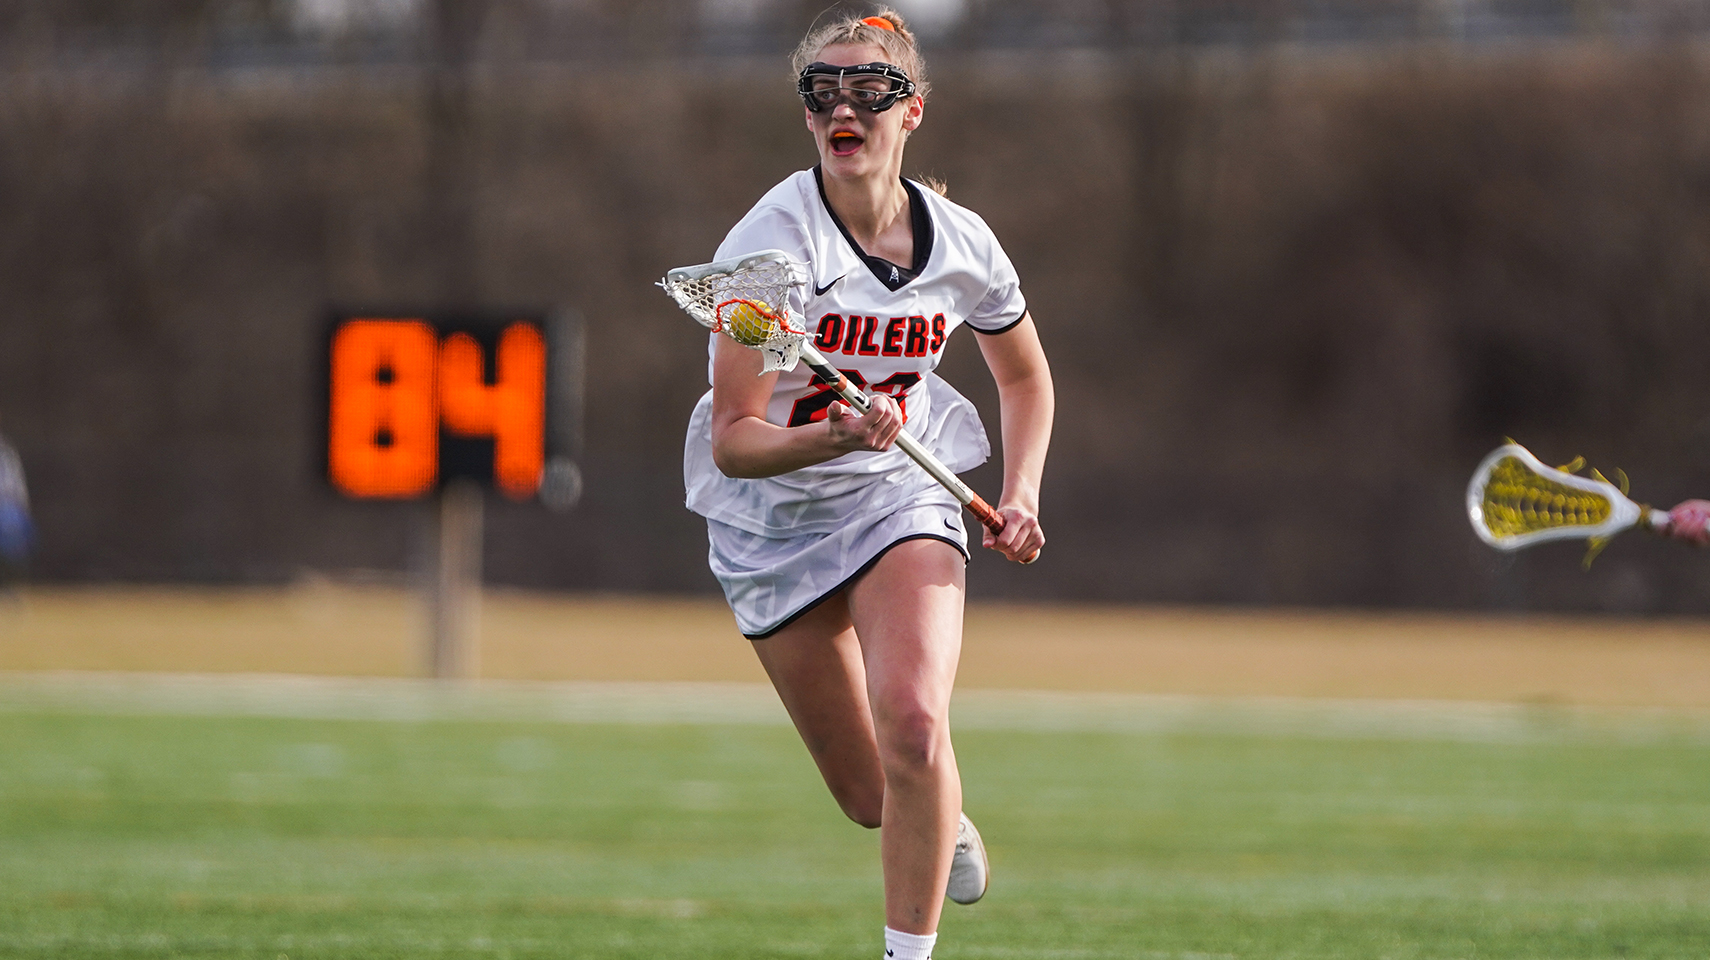 Women's lacrosse player in white running with the ball